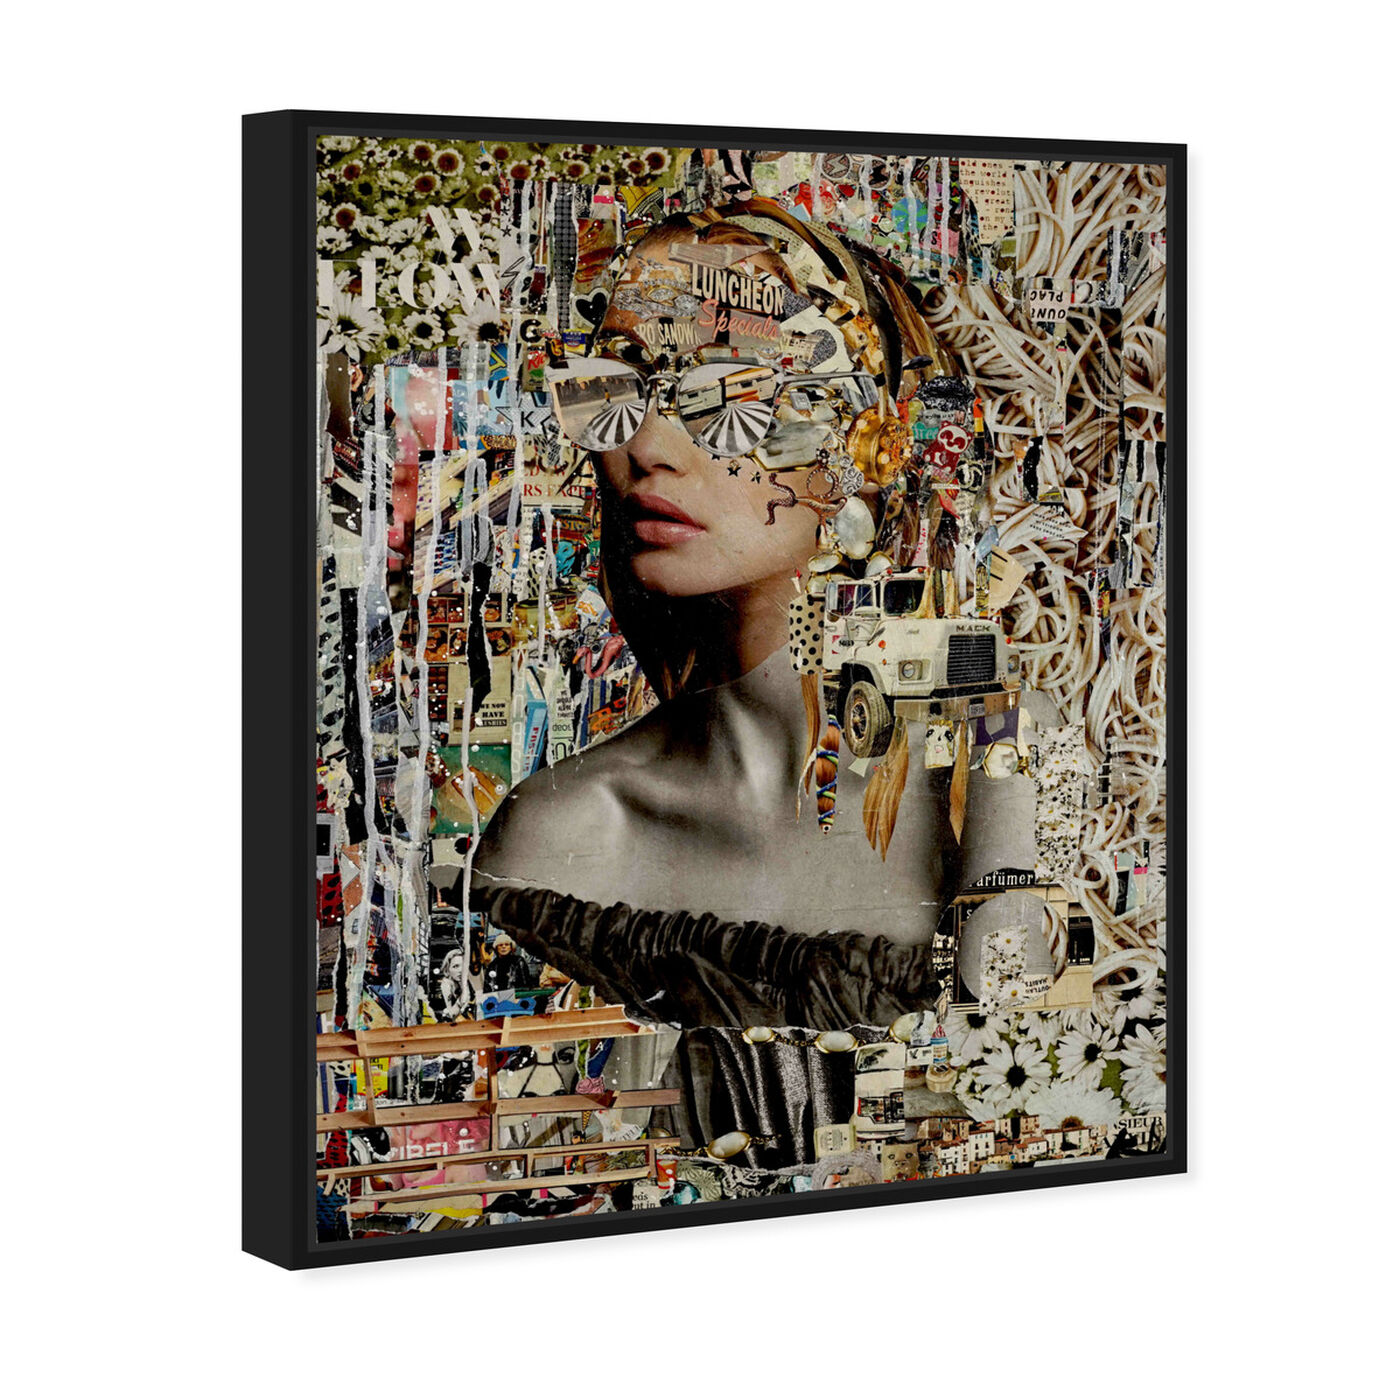 Angled view of Katy Hirschfeld - Flower Modern featuring fashion and glam and portraits art.